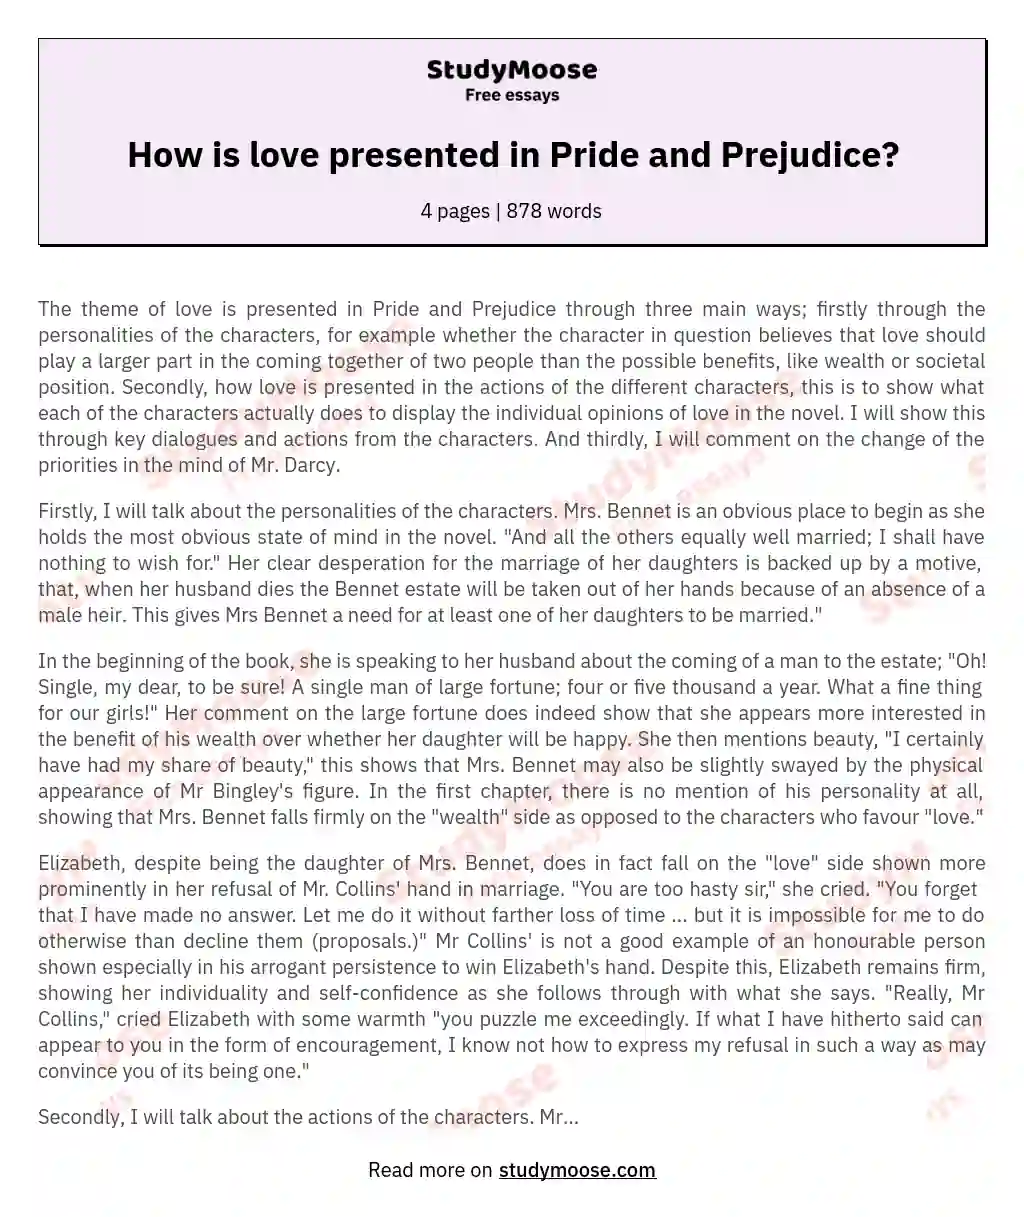 How is love presented in Pride and Prejudice? essay